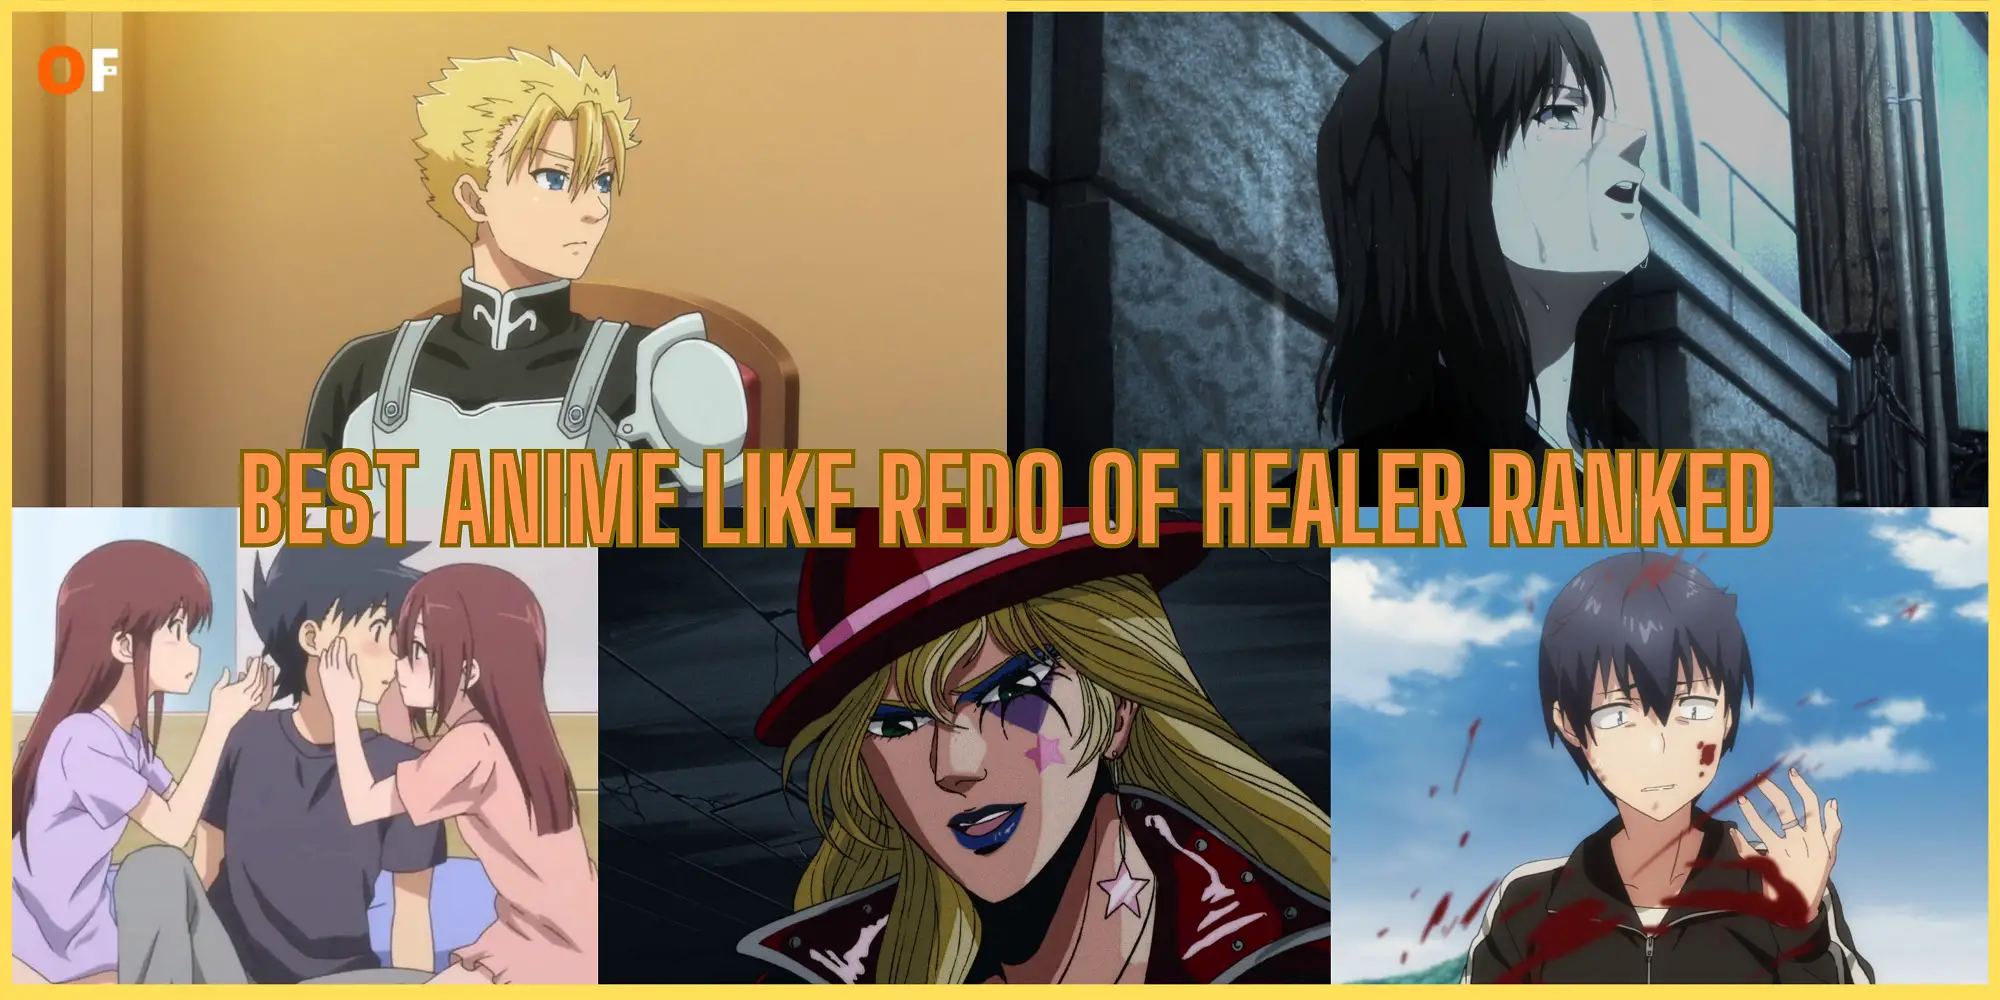 Redo of Healer is About To Be Canceled Like Interspecies Reviewers